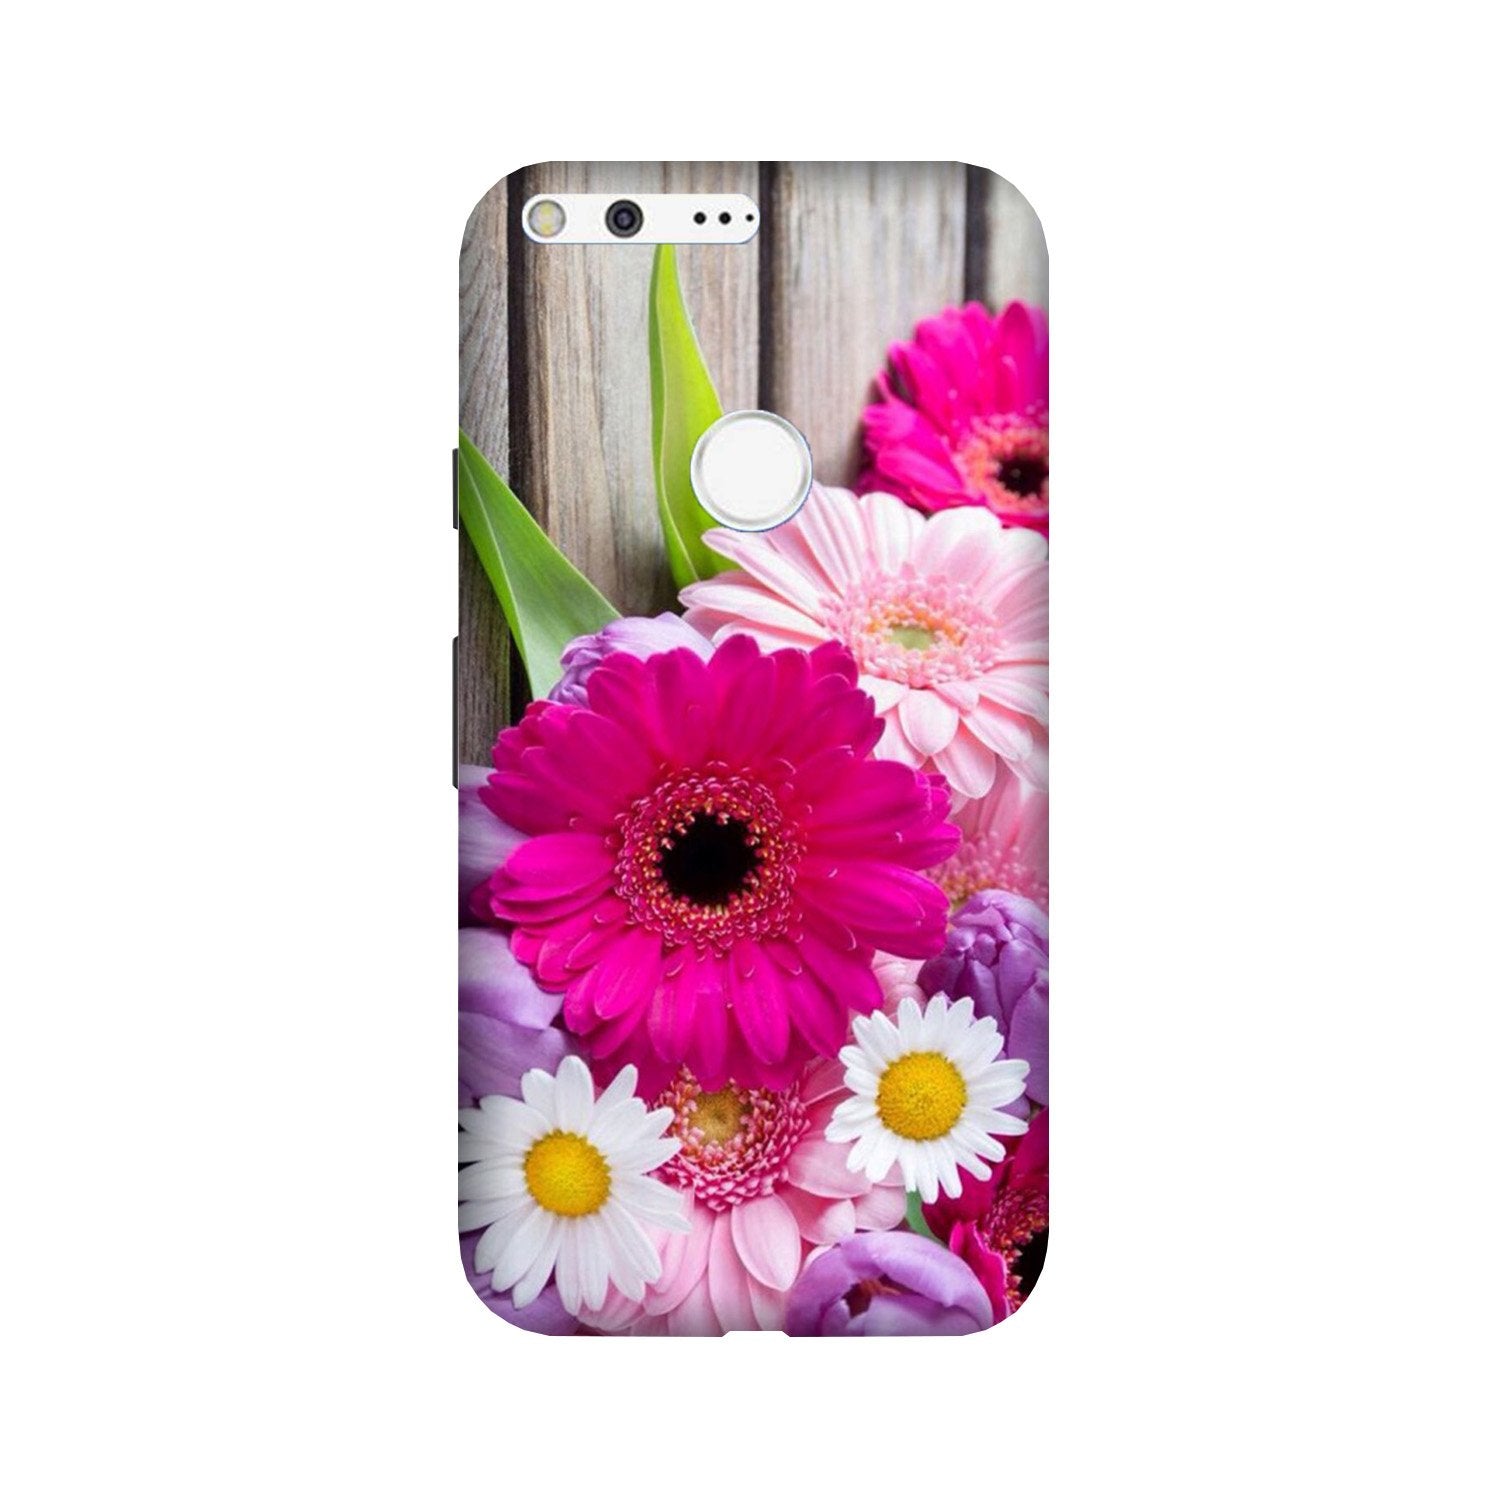 Coloful Daisy2 Case for Google Pixel